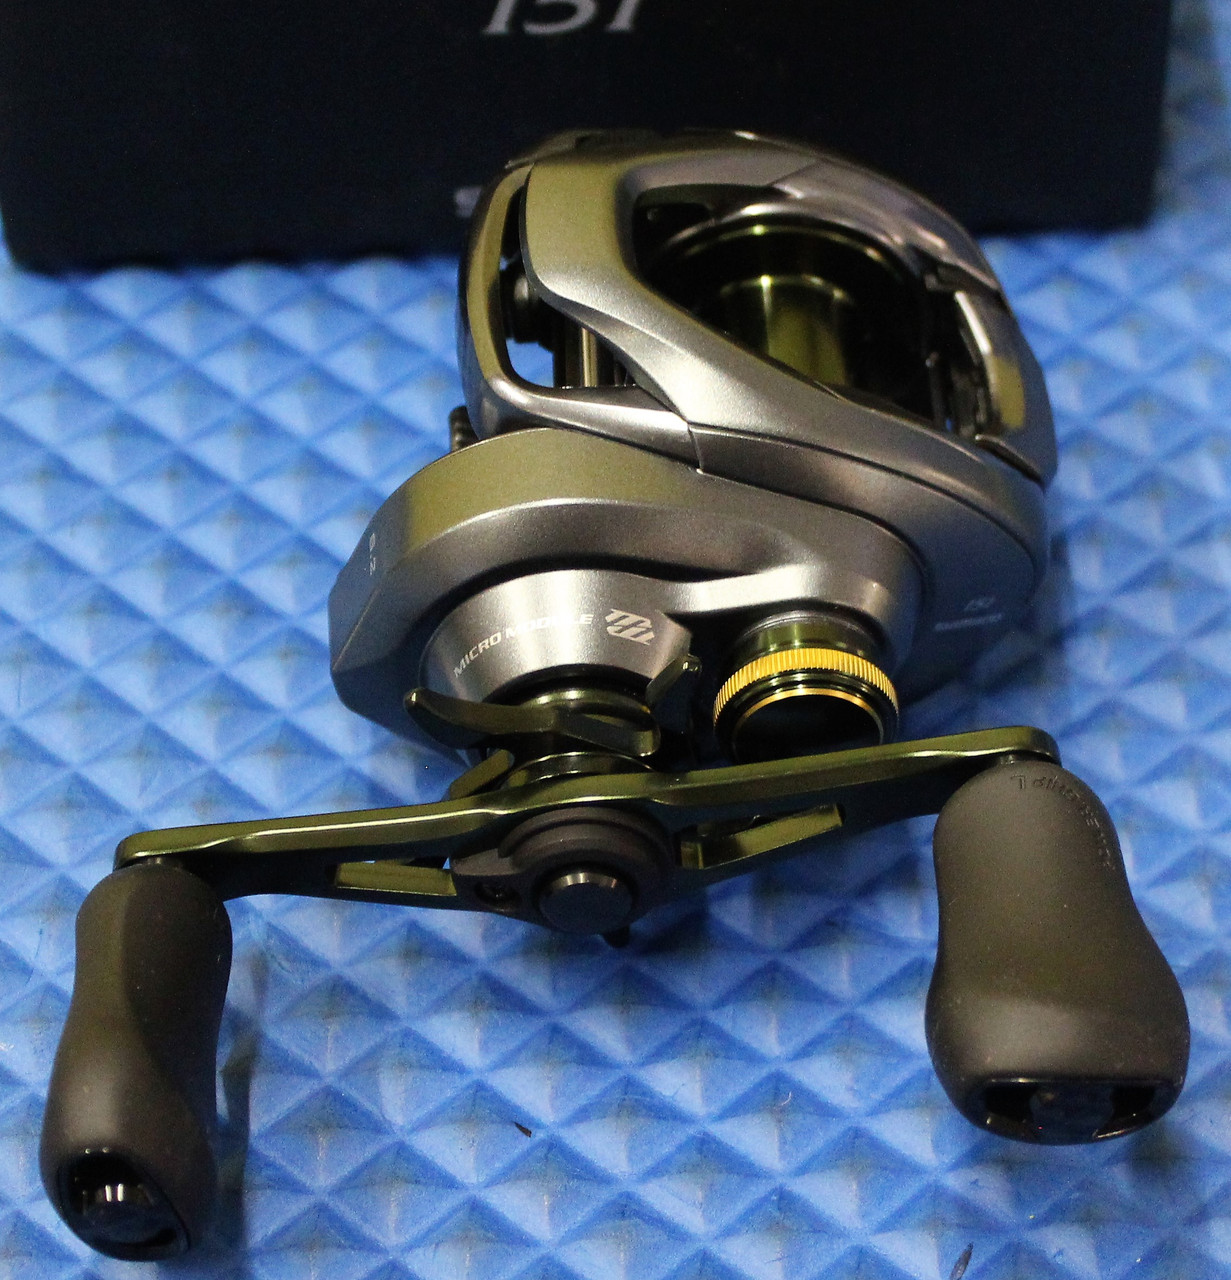 The perfect gift Baitcast Reels Shimano SLX DC 151 HG LEFT HANDED